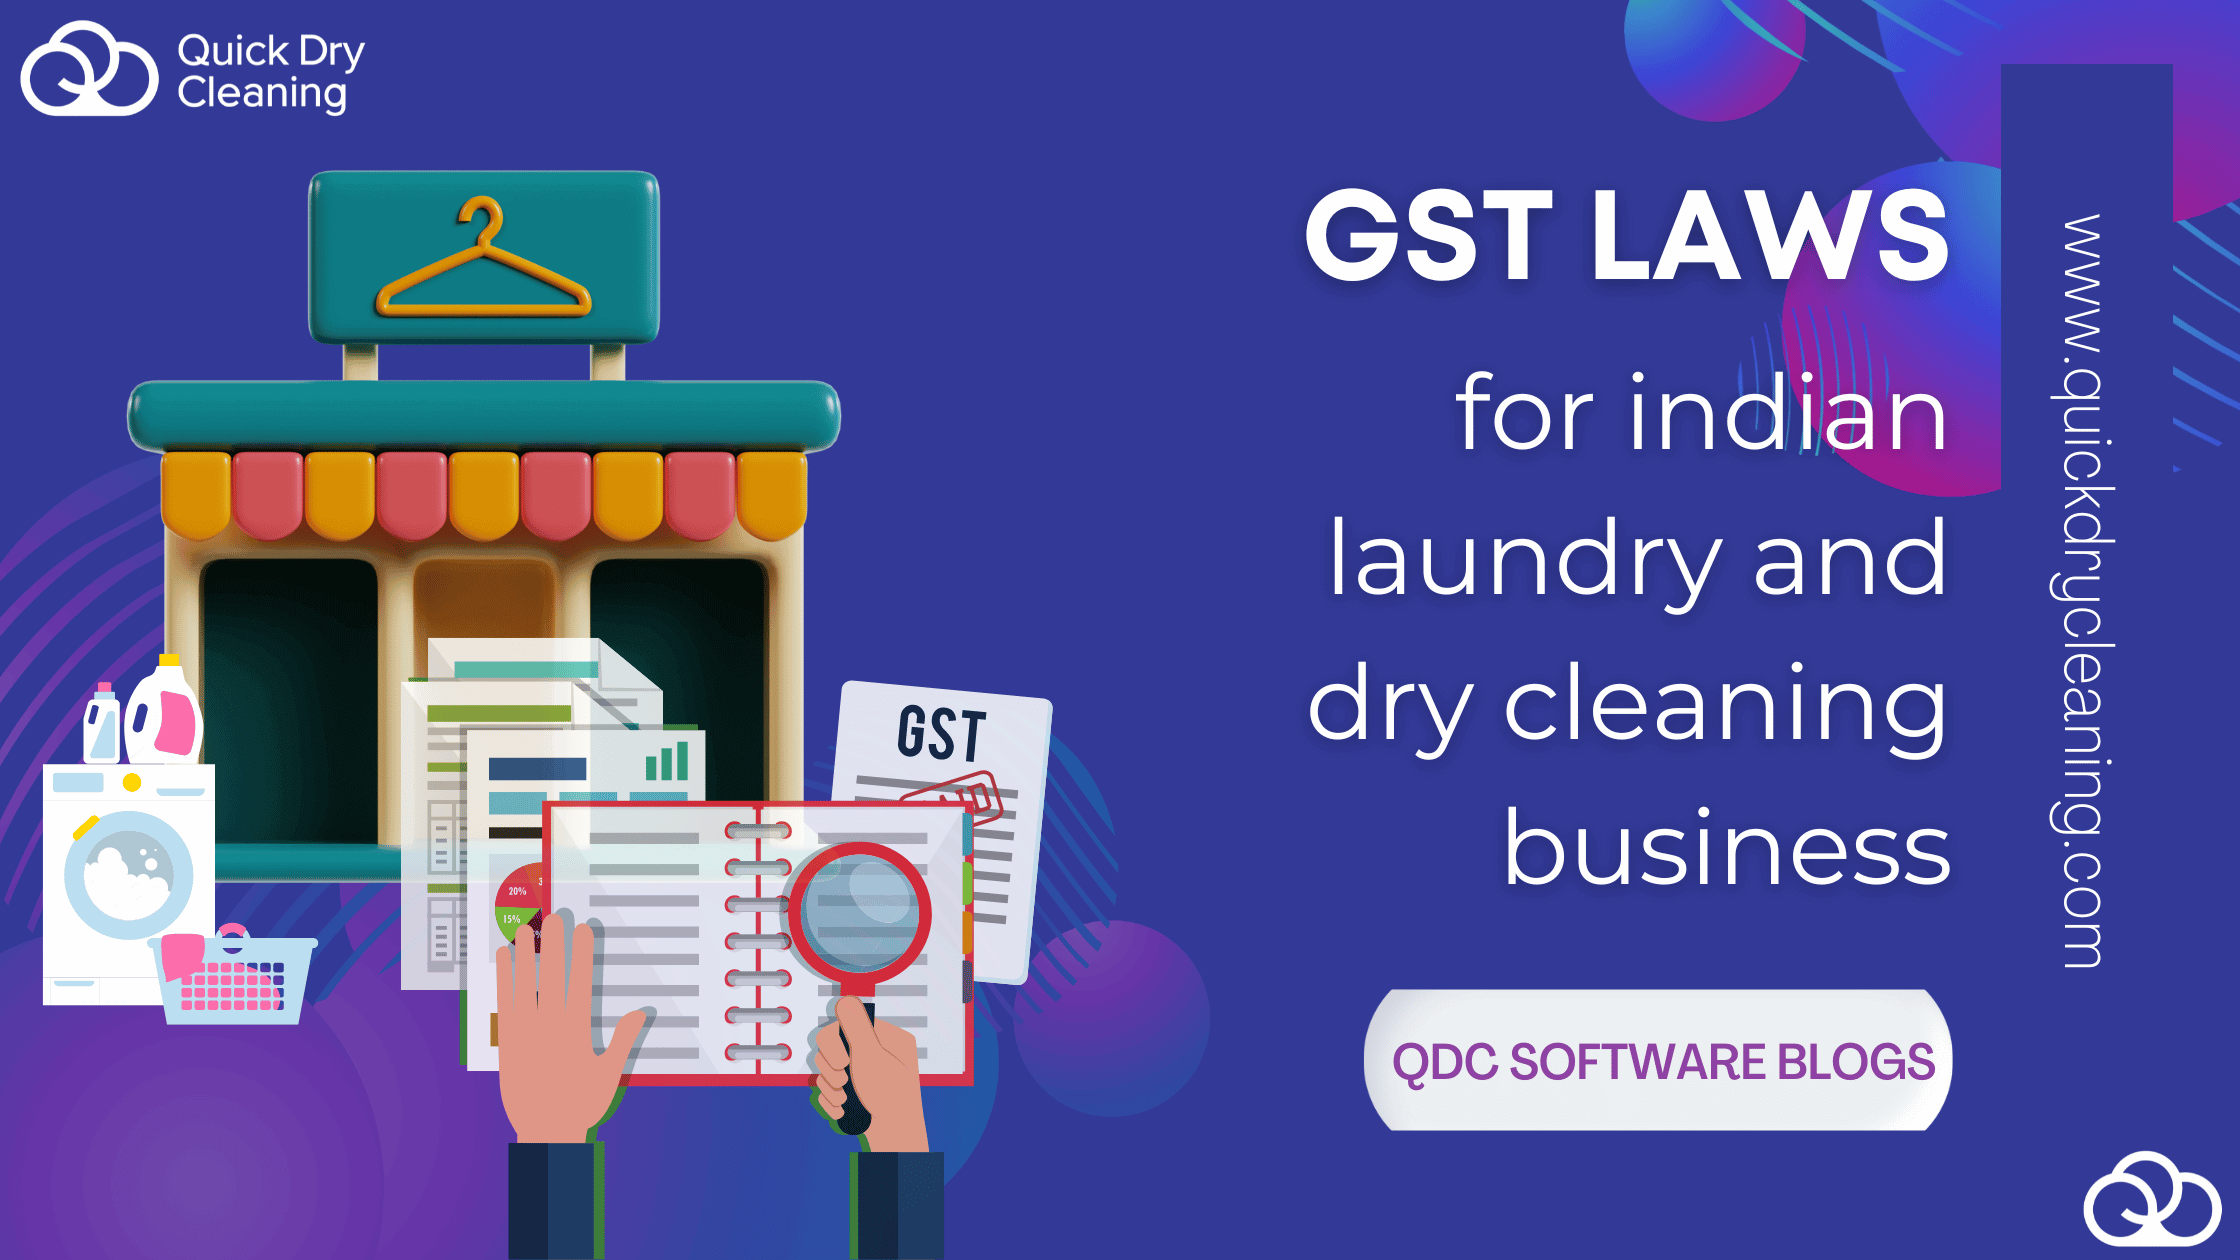 GST law for Indian dry cleaning and laundry business